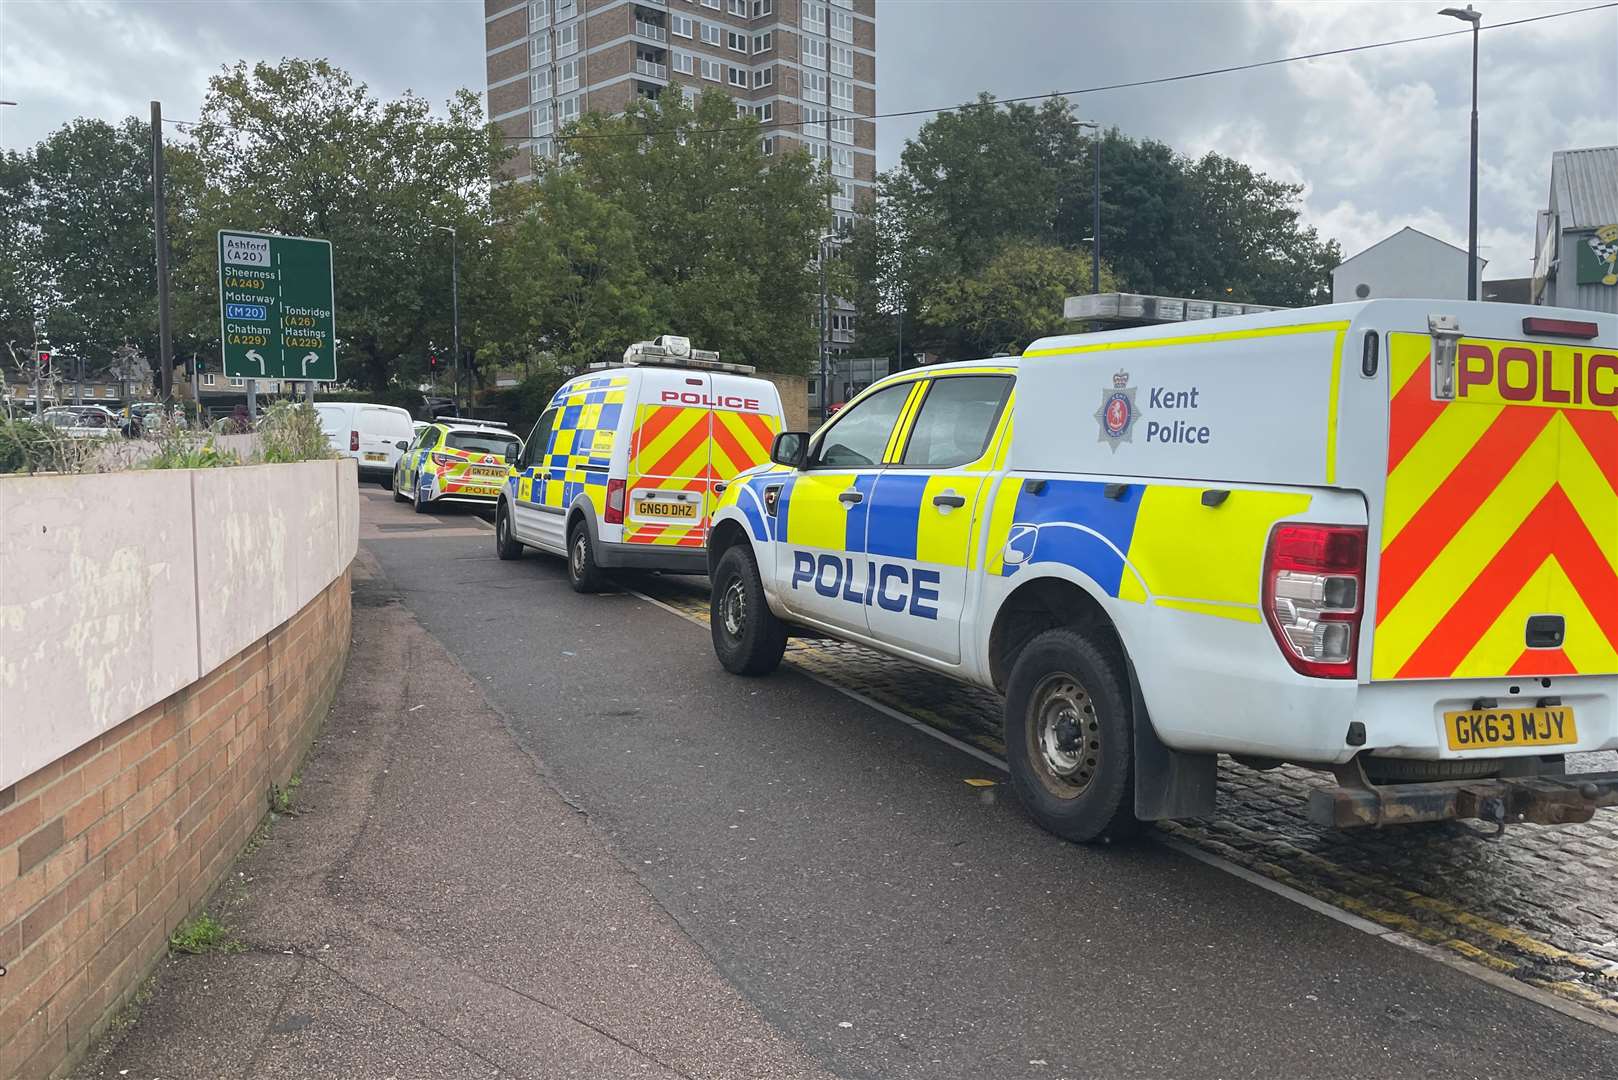 A police cordon and multiple vehicles were near Sainsbury's in Romney Place, Maidstone, on Monday morning